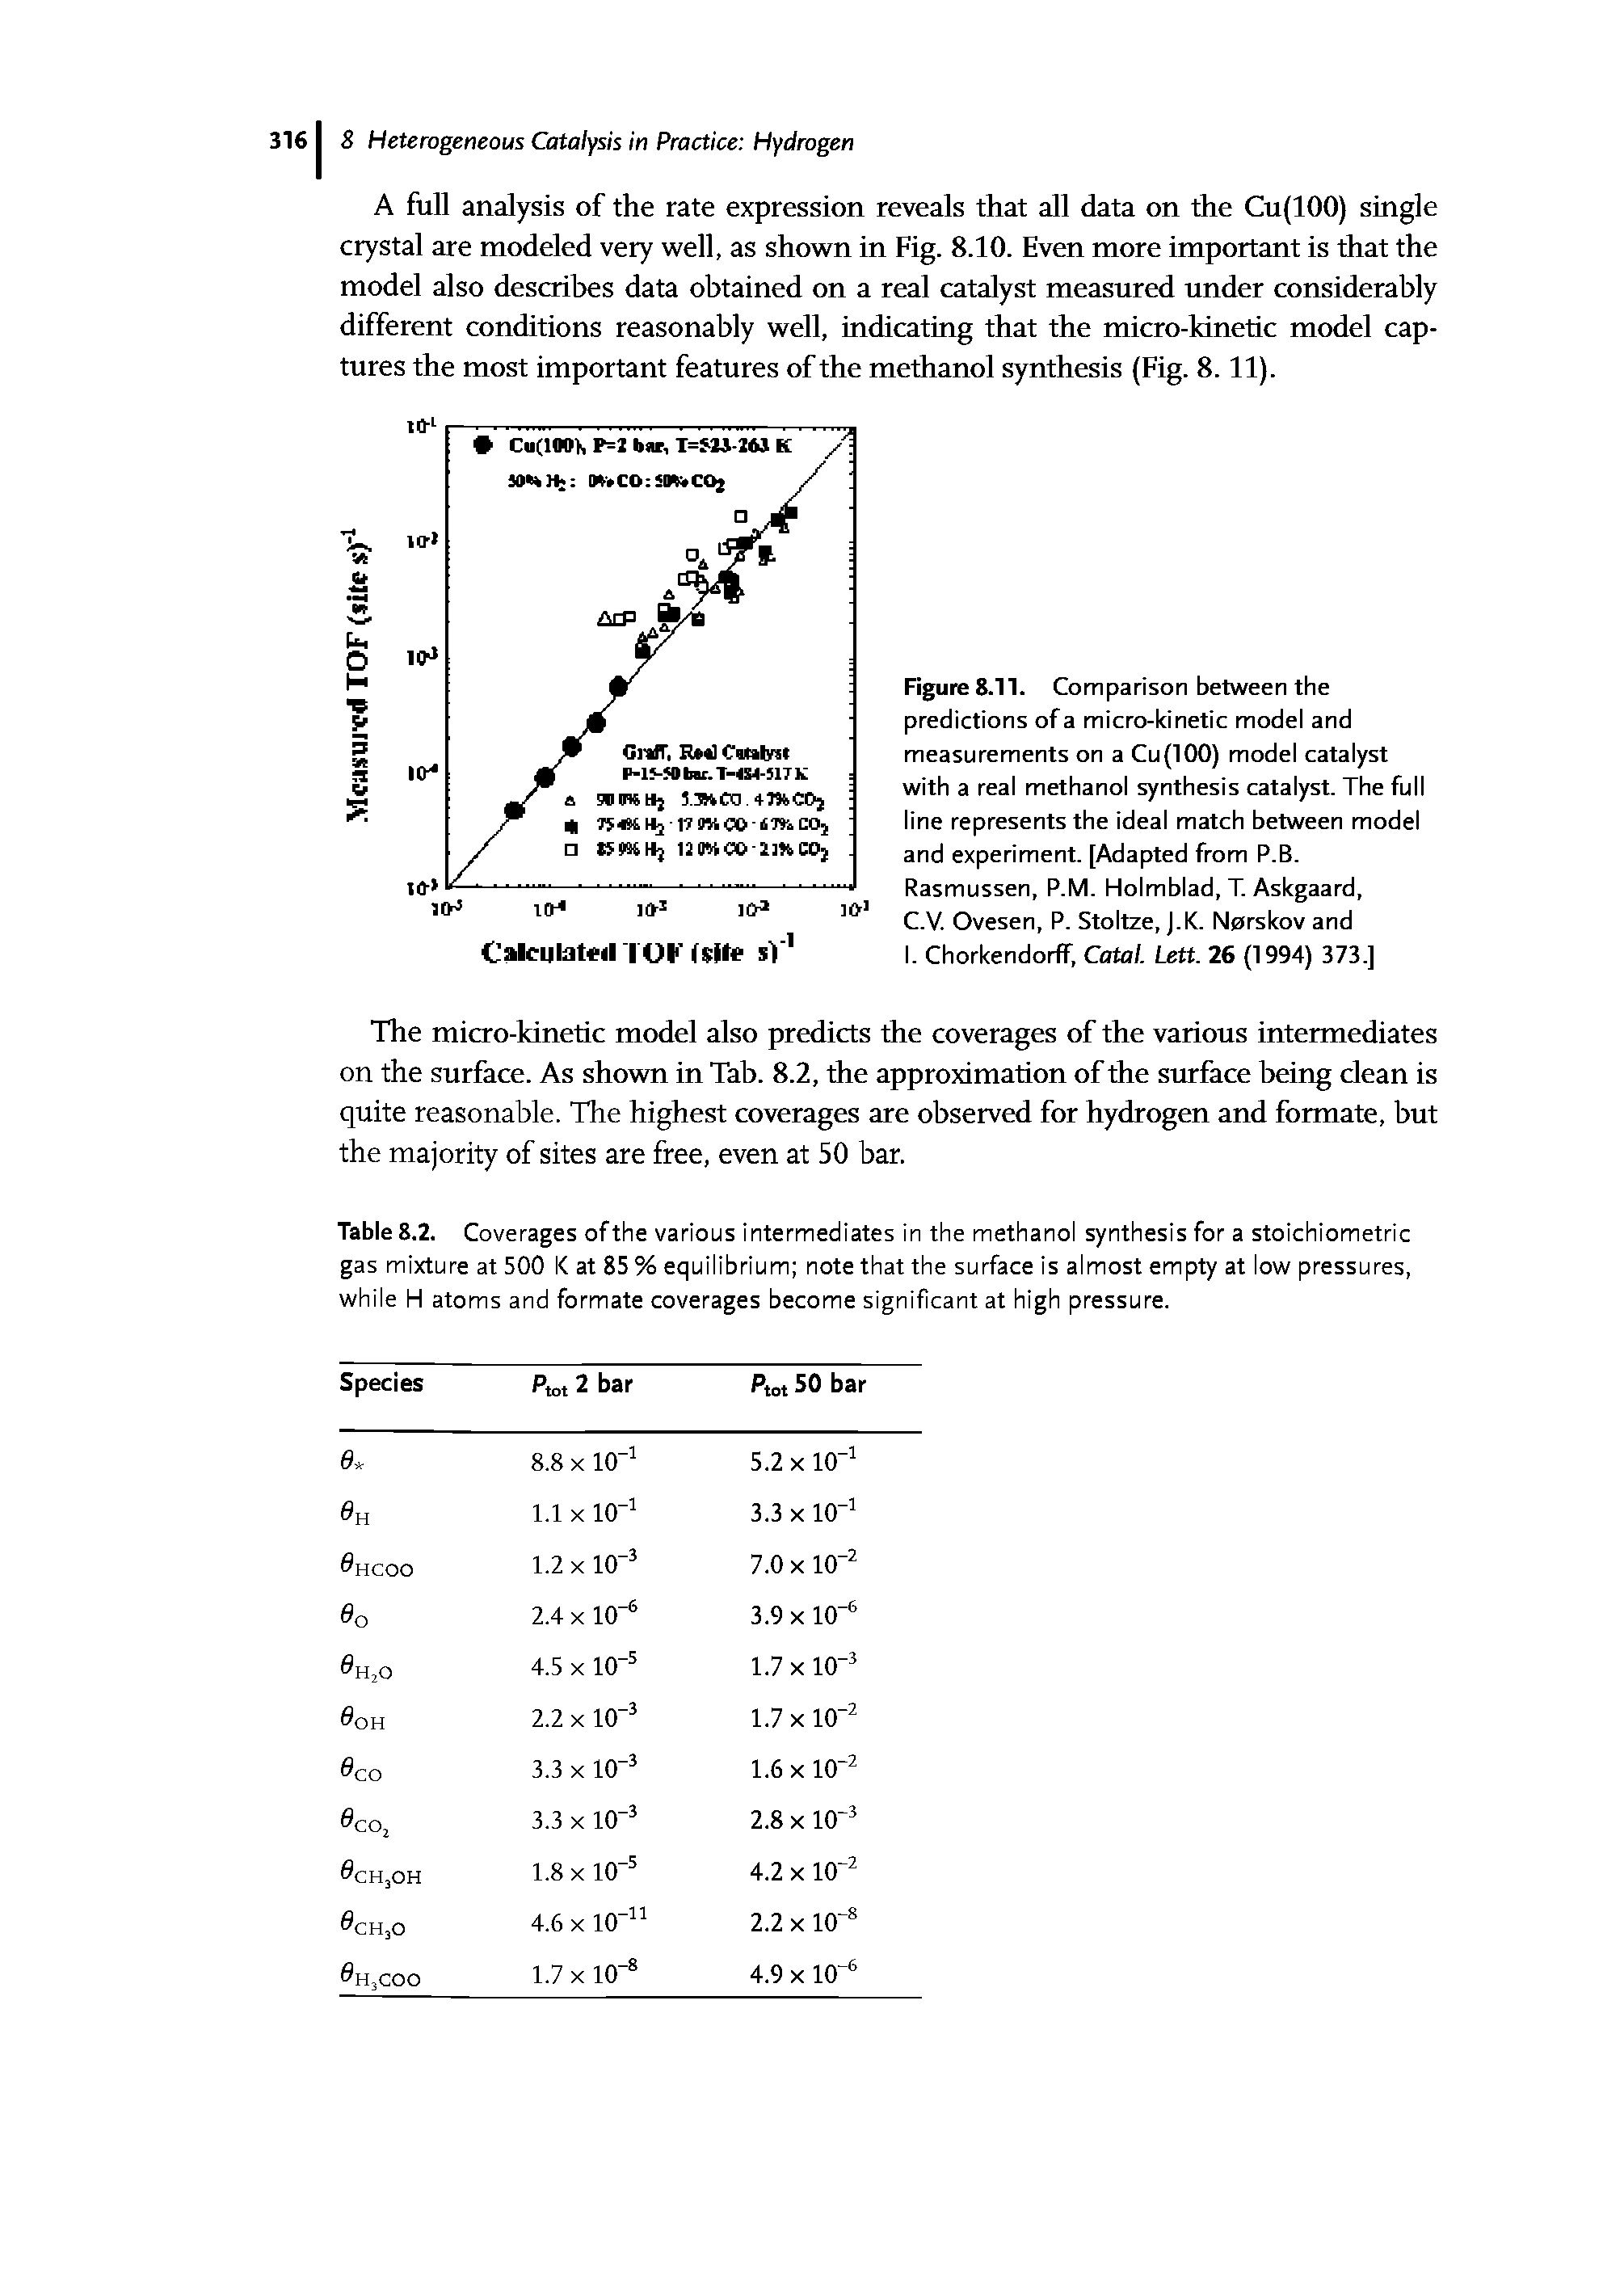 Figure S.11. Comparison between the predictions of a micro-kinetic model and measurements on a Cu(lOO) model catalyst with a real methanol synthesis catalyst. The full line represents the ideal match between model and experiment. [Adapted from P.B. Rasmussen, P.M. Holmblad, T. Askgaard,...